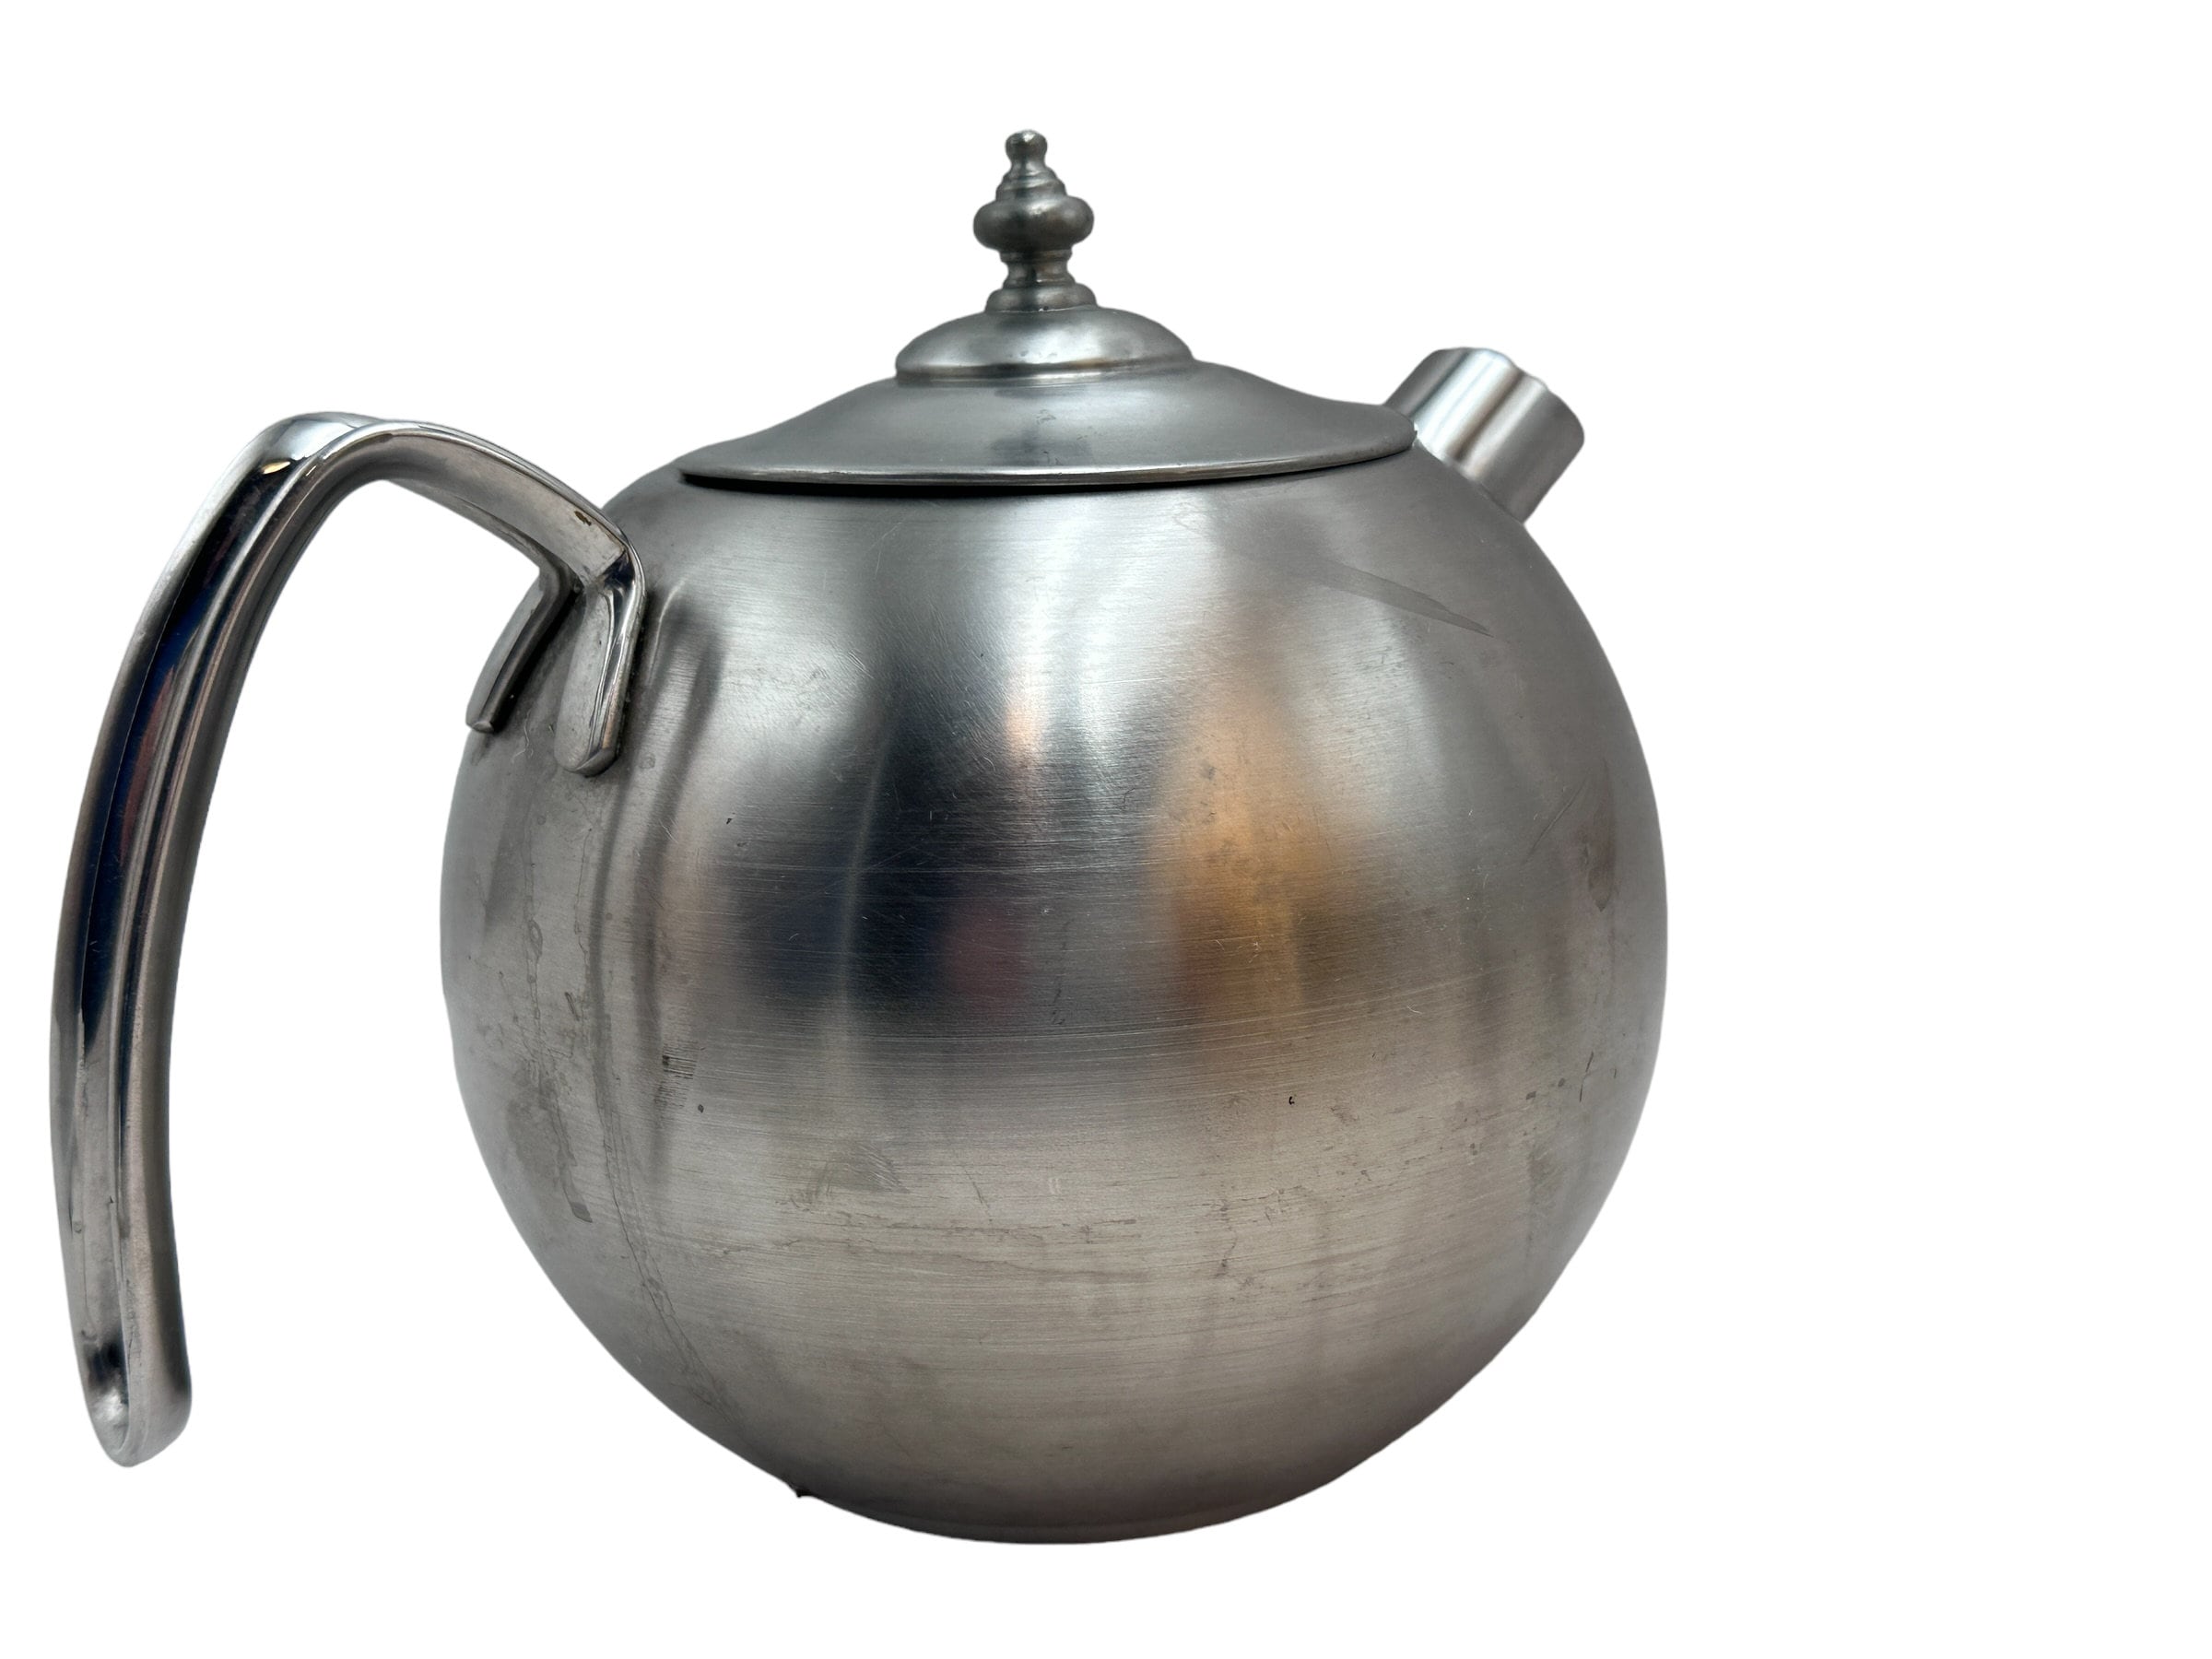 Service Ideas TT07SS Tea Time Round Teapot, 24 ounces, Stainless Steel,  Polished